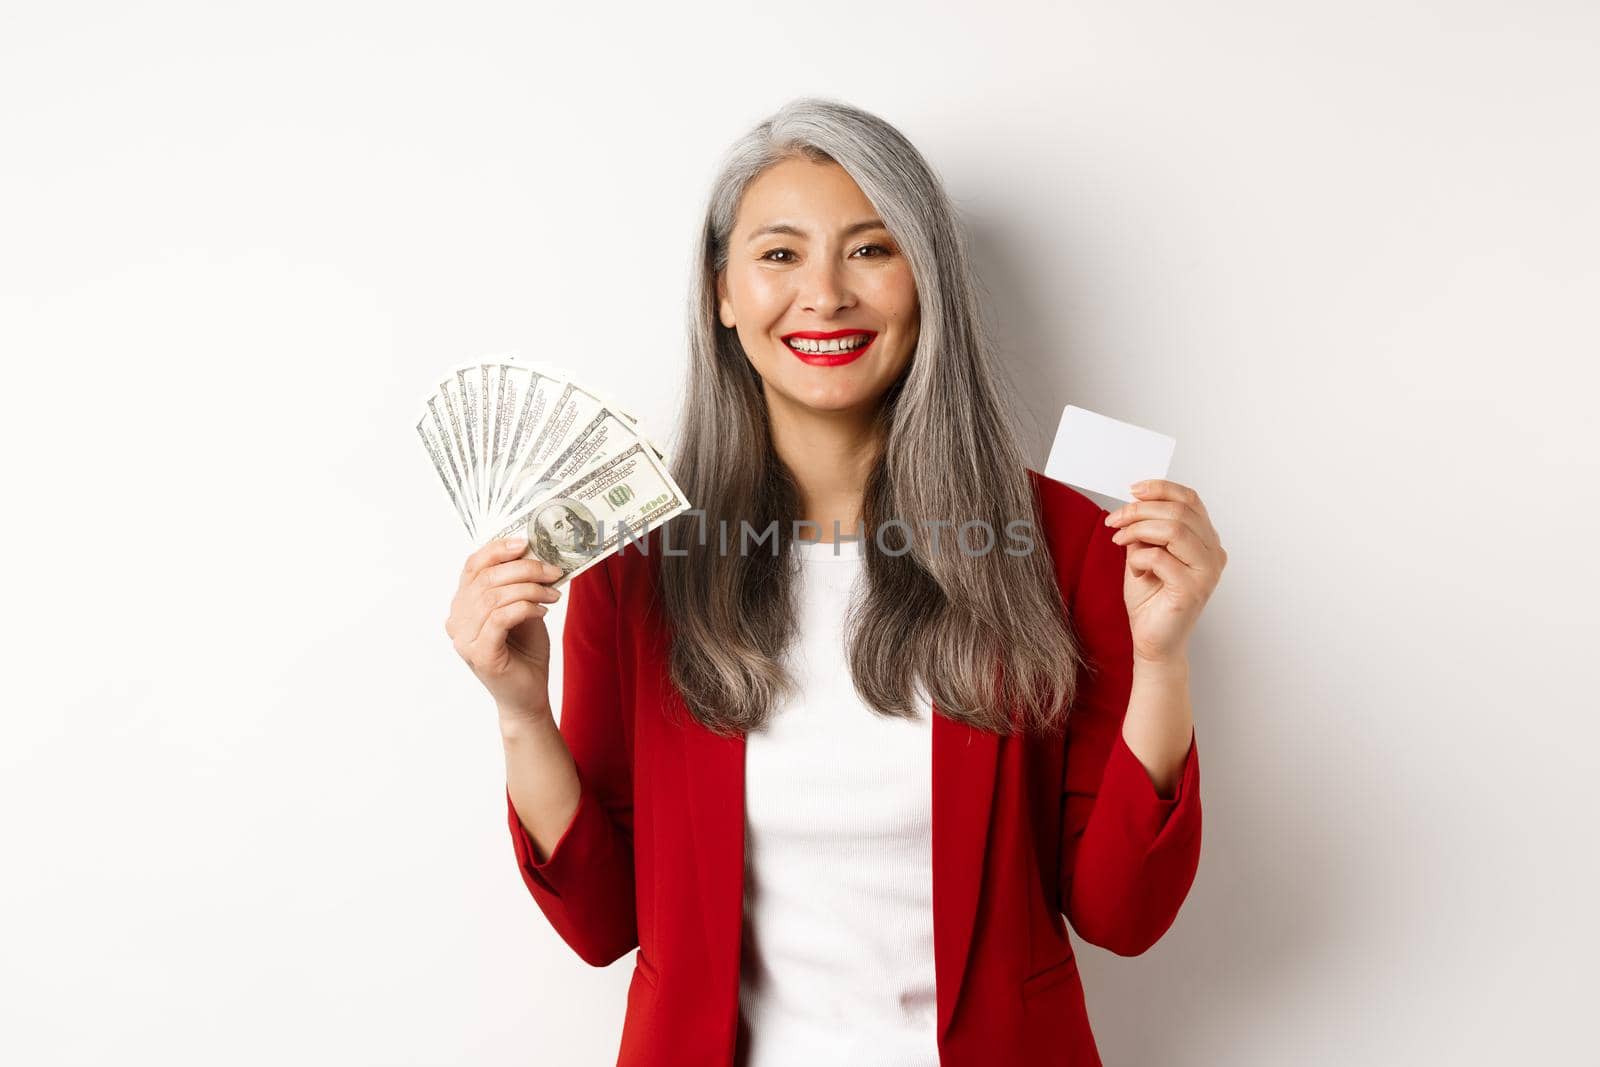 Successful asian senior businesswoman showing money in dollars and plastic card, smiling happy at camera, wearing red blazer and make-up.